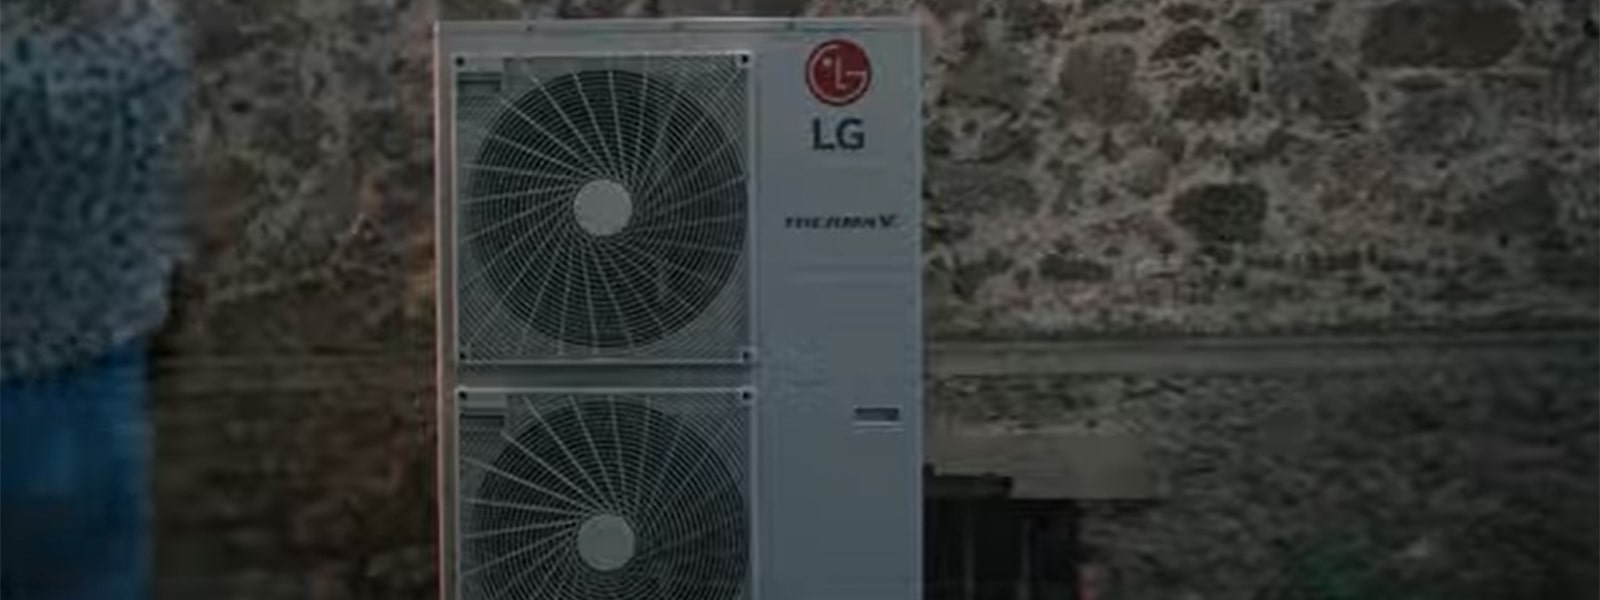 LG Therma V air to water heat pump: Home heating